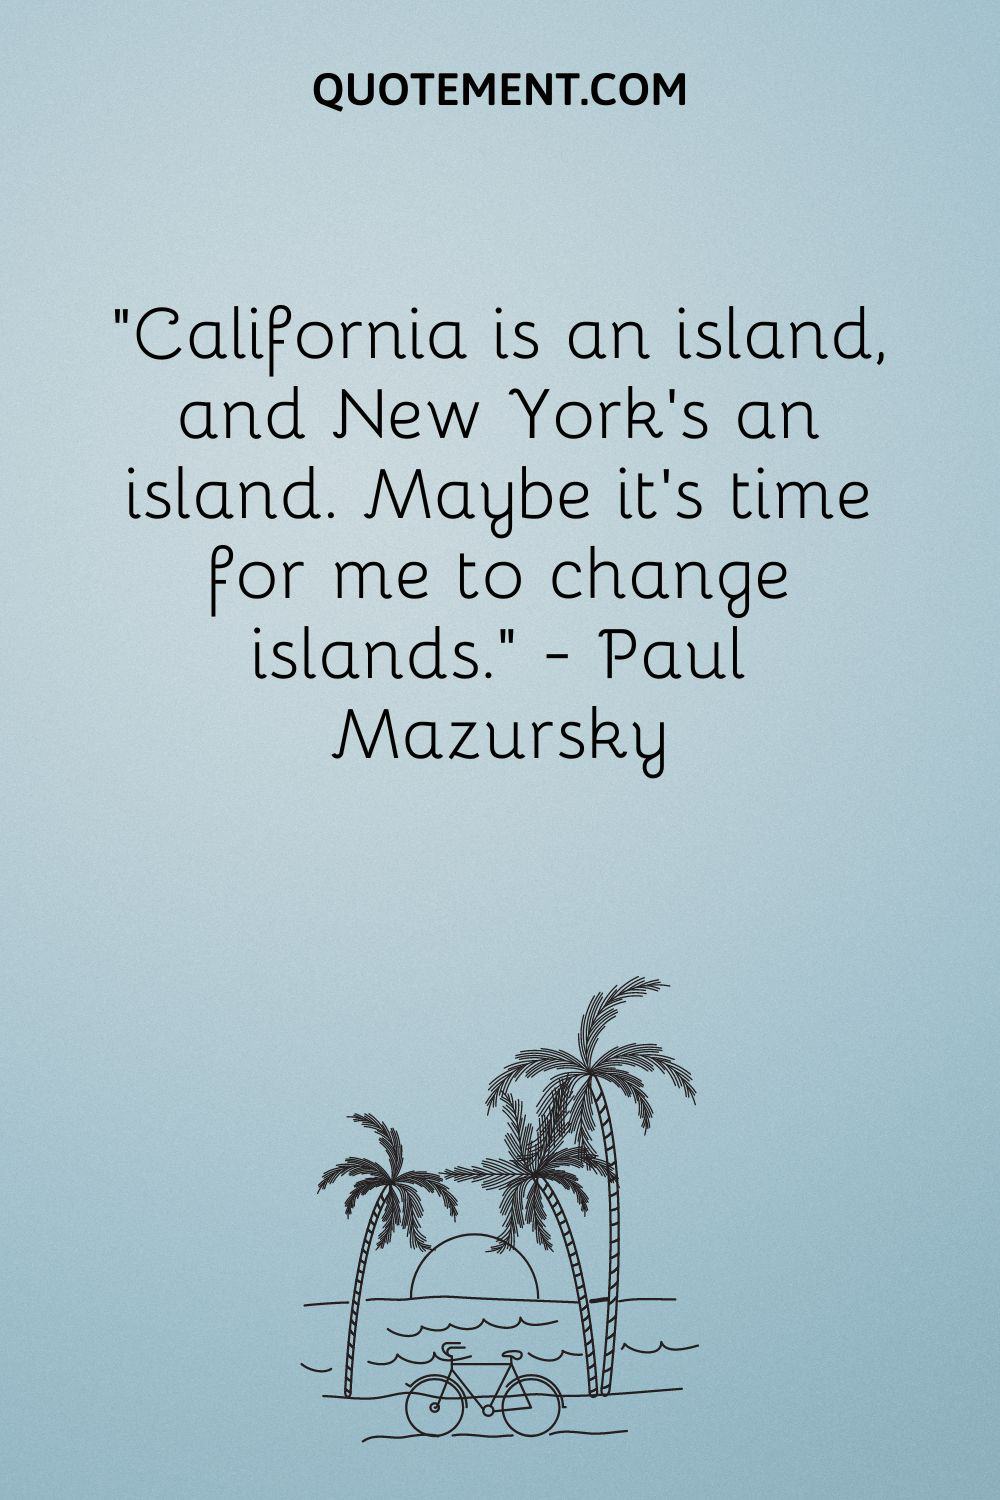 “California is an island, and New York's an island. Maybe it's time for me to change islands.” — Paul Mazursky